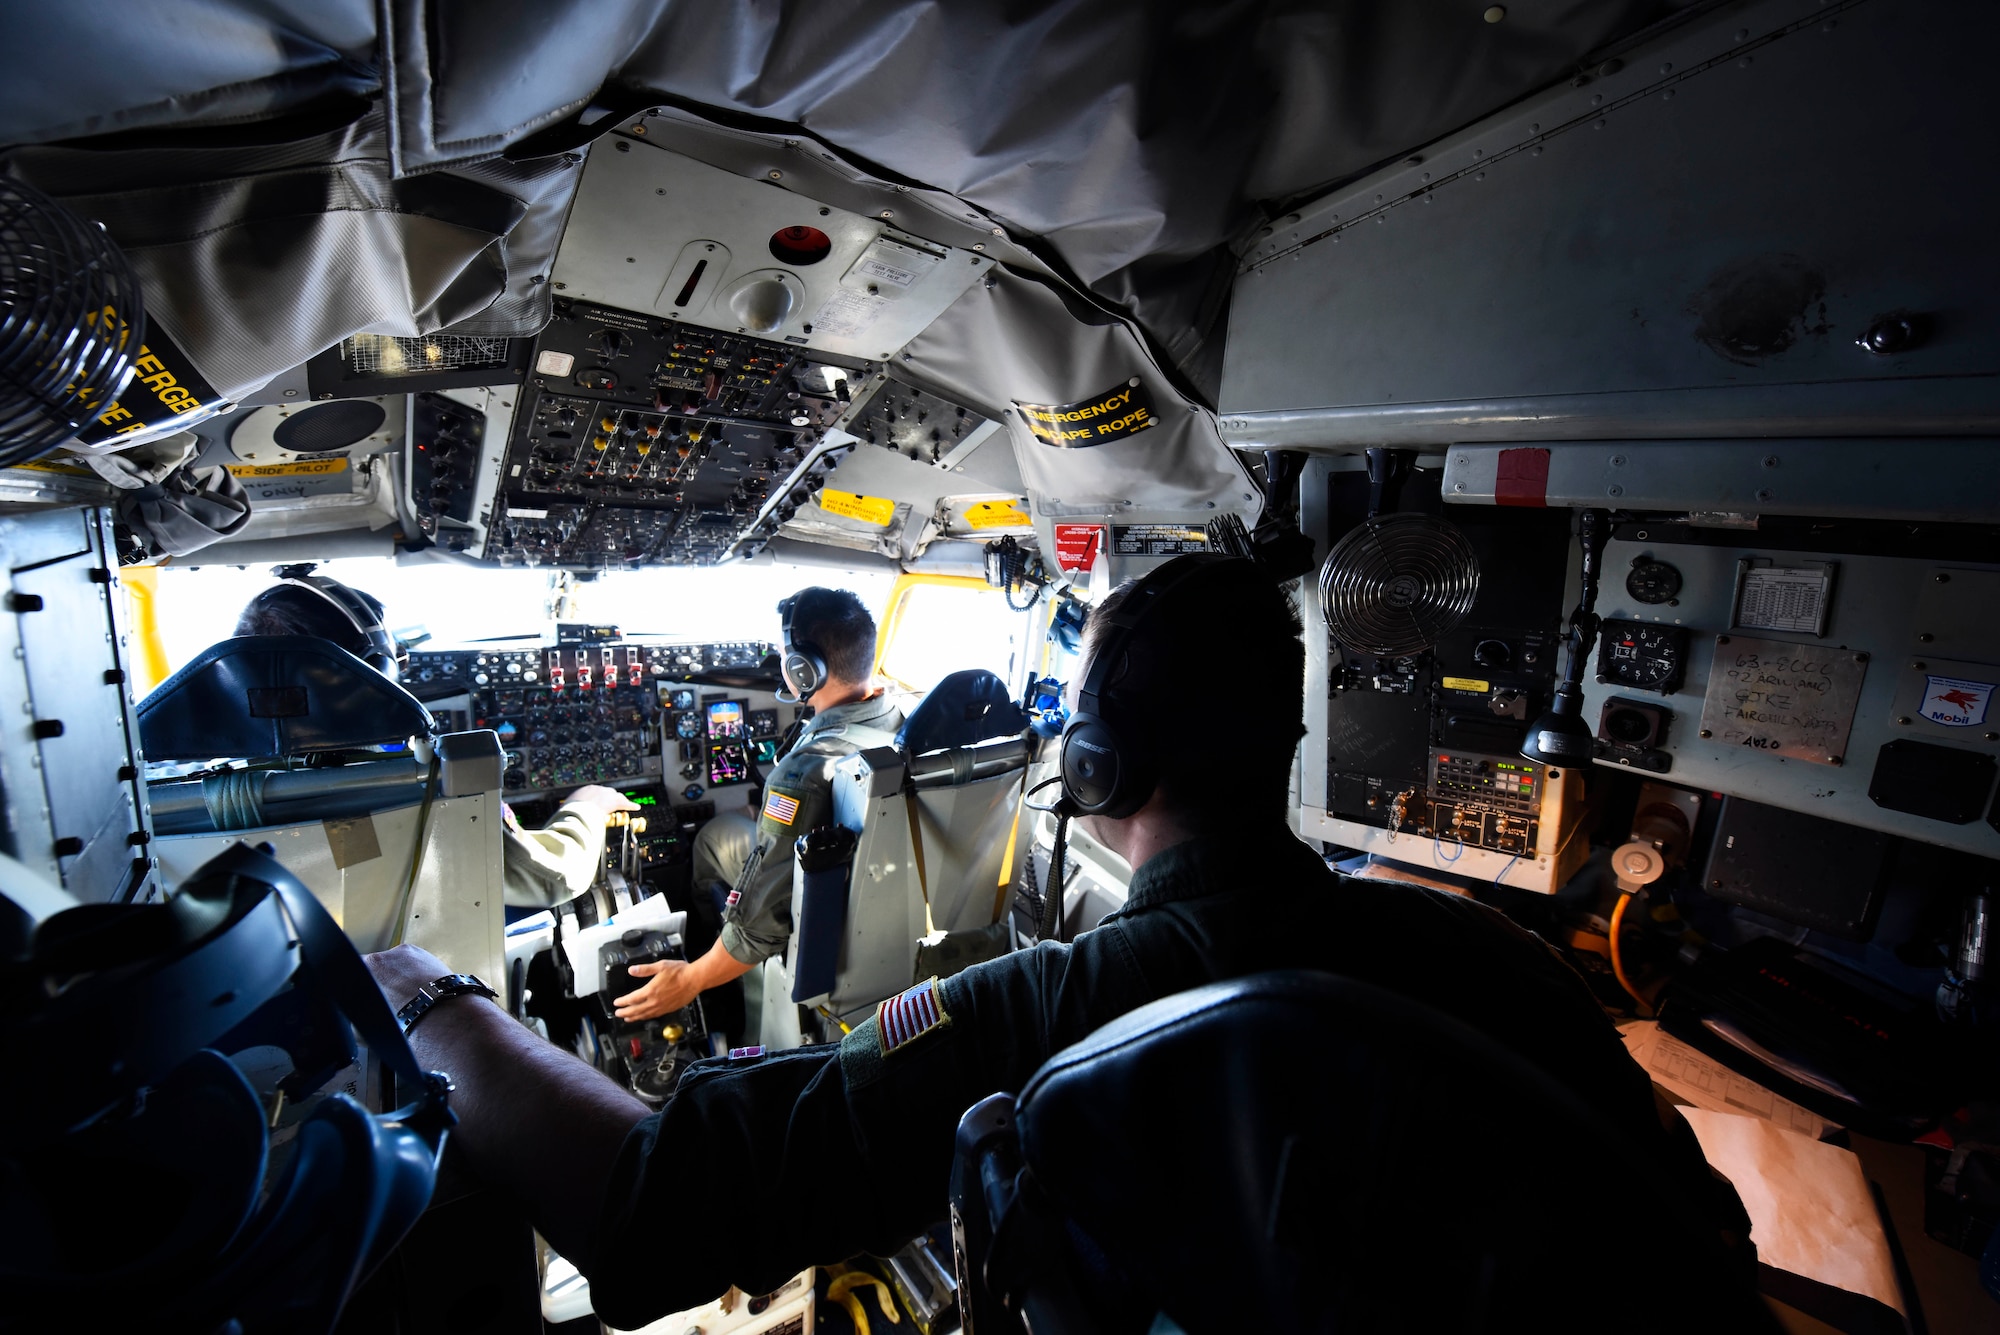 An aircrew from the 384th Air Refueling Squadron flies a KC-135 Stratotanker during Exercise Global Thunder 2019 over the U.S. Northwestern Region, Novermber 2018. Global Thunder is a U.S. Strategic Command exercise designed to ensure an efficient mission response by testing Airmen's ability to execute command, control and operational procedures during simulated combat scenarios. (U.S. Air Force photo/Airman 1st Class Lawrence Sena)